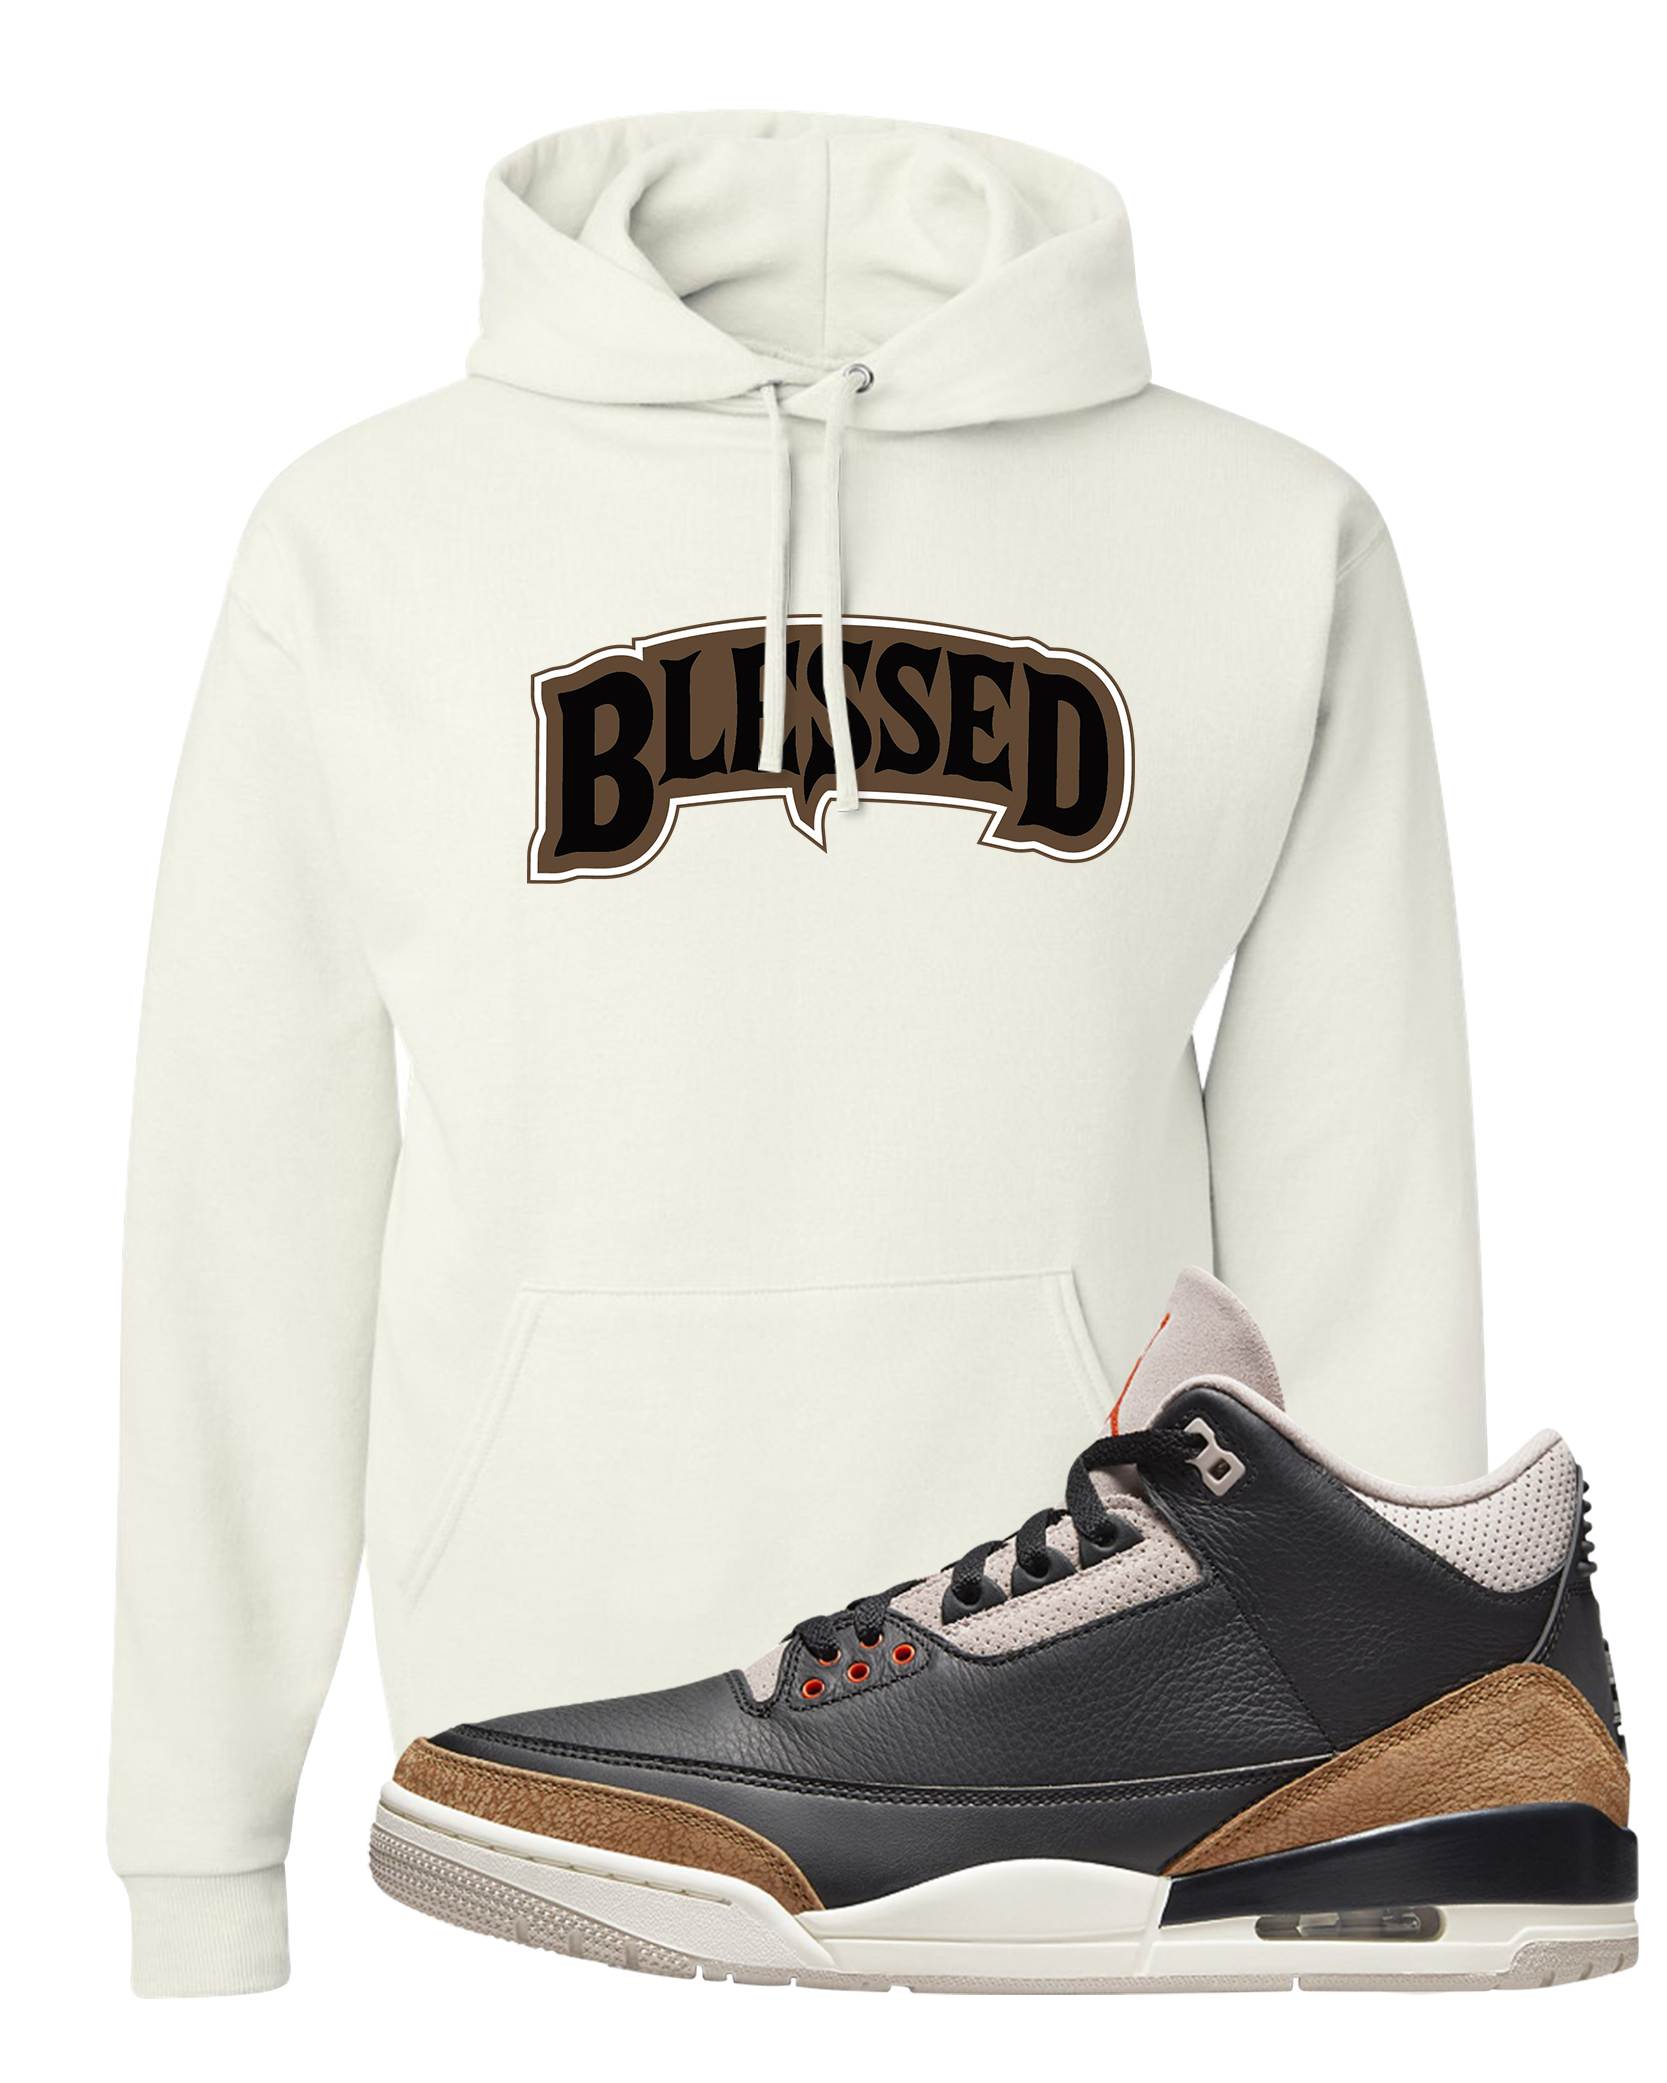 Desert Elephant 3s Hoodie | Blessed Arch, White